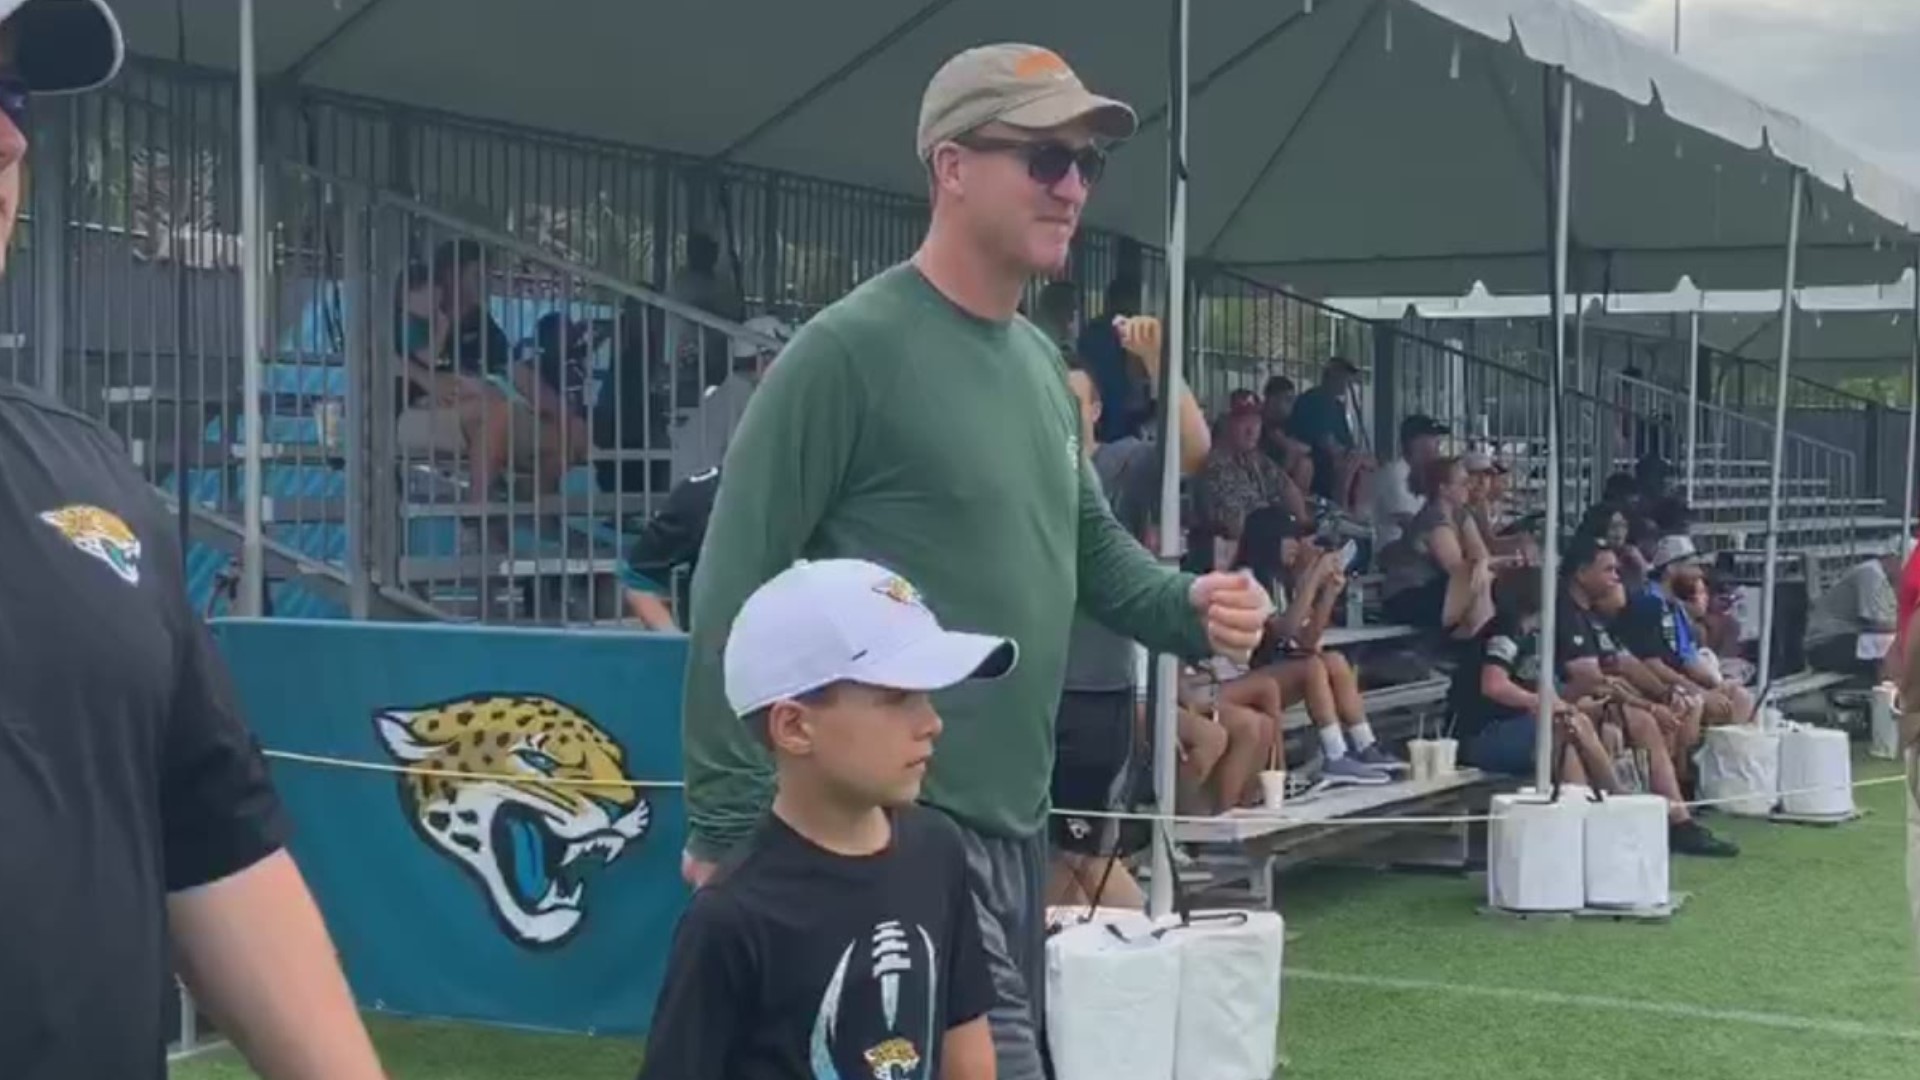 On Thursday, Tom Coughlin escorted him inside the Jaguars practice facility with Manning's son in tow.